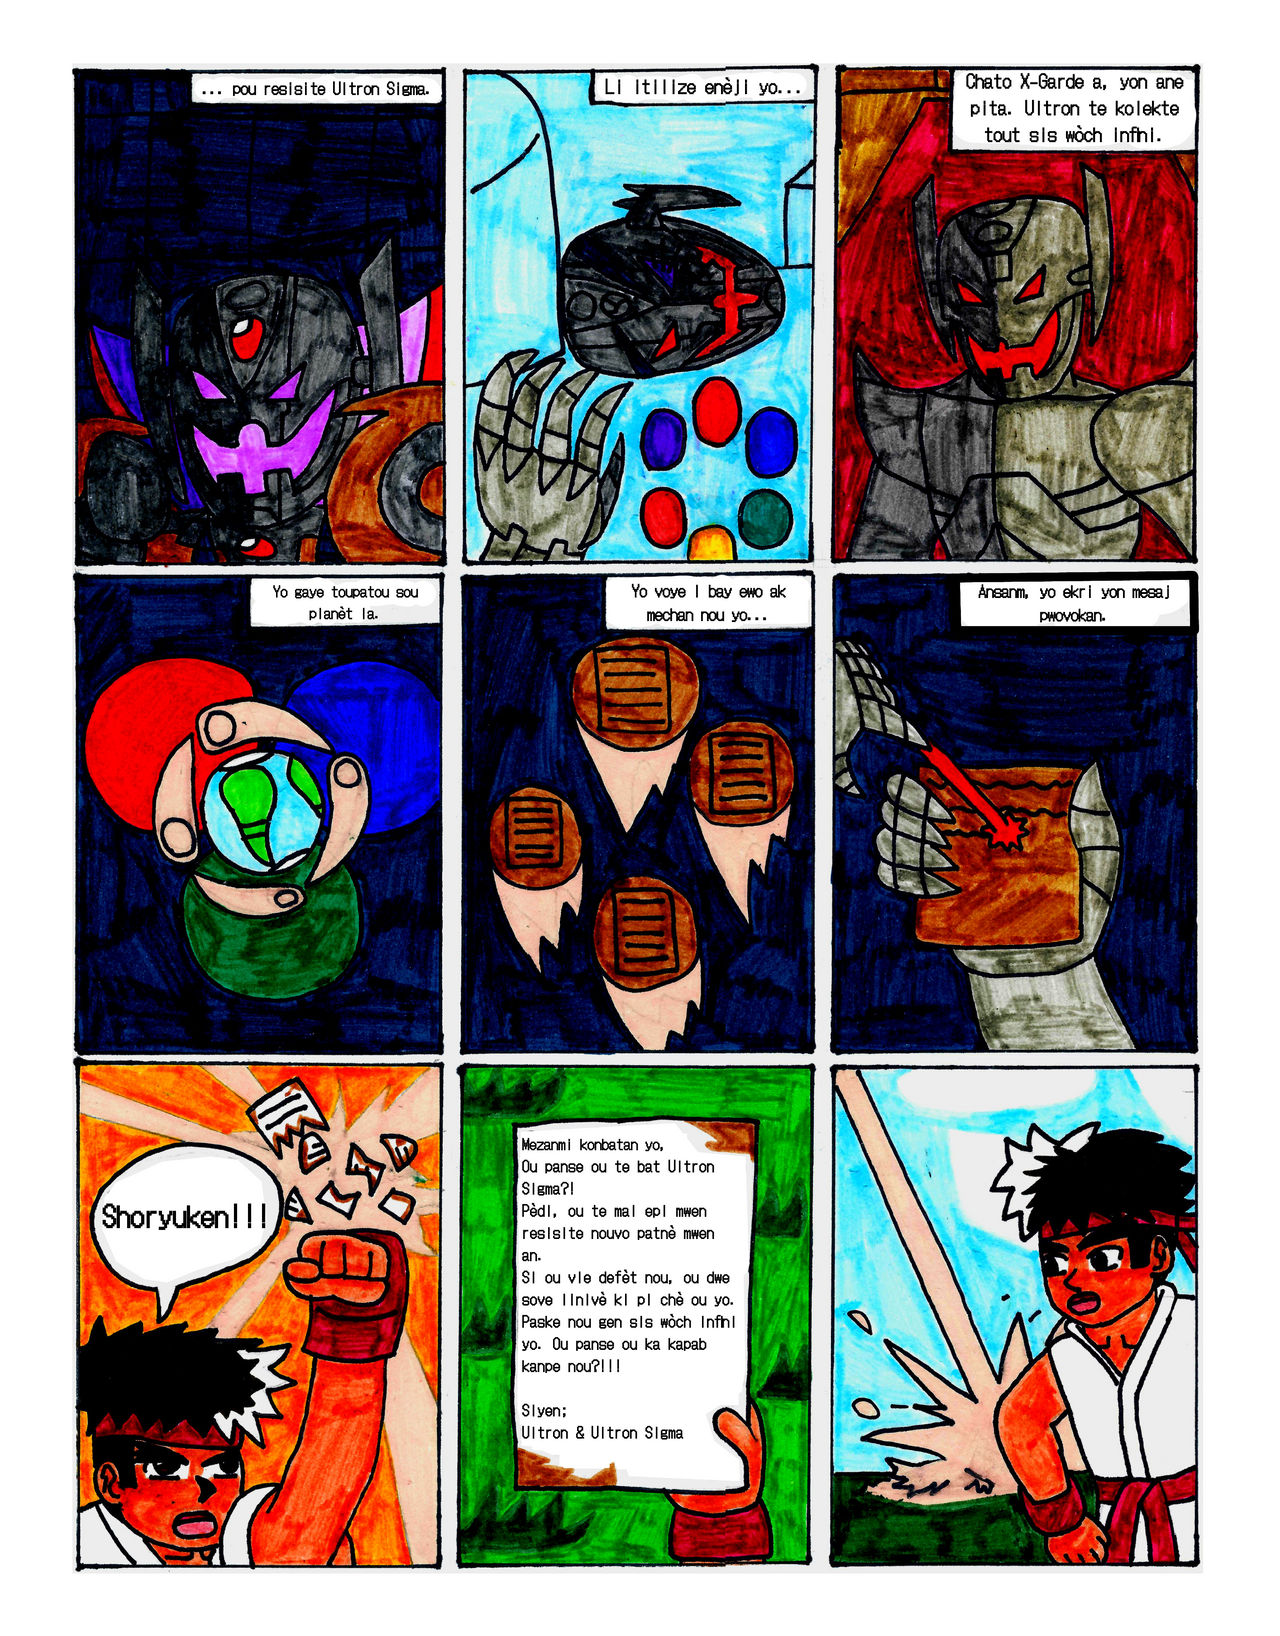 AxC Ep 01 Page 01 (Haitian Creole) by FrancoSantilario3D on DeviantArt